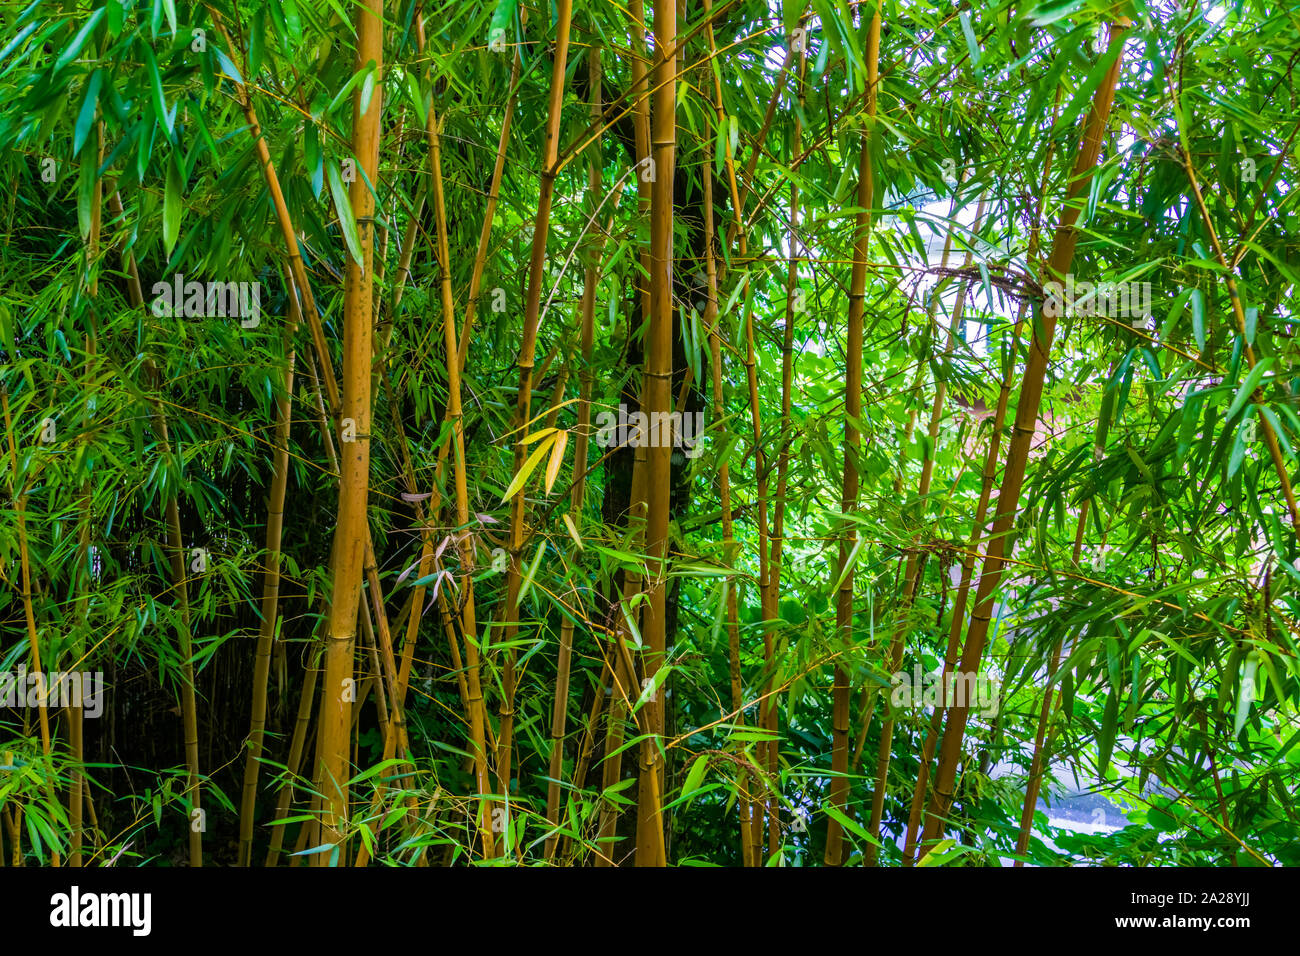 bamboo forest, bamboo trunks in closeup, Asian nature background Stock  Photo - Alamy